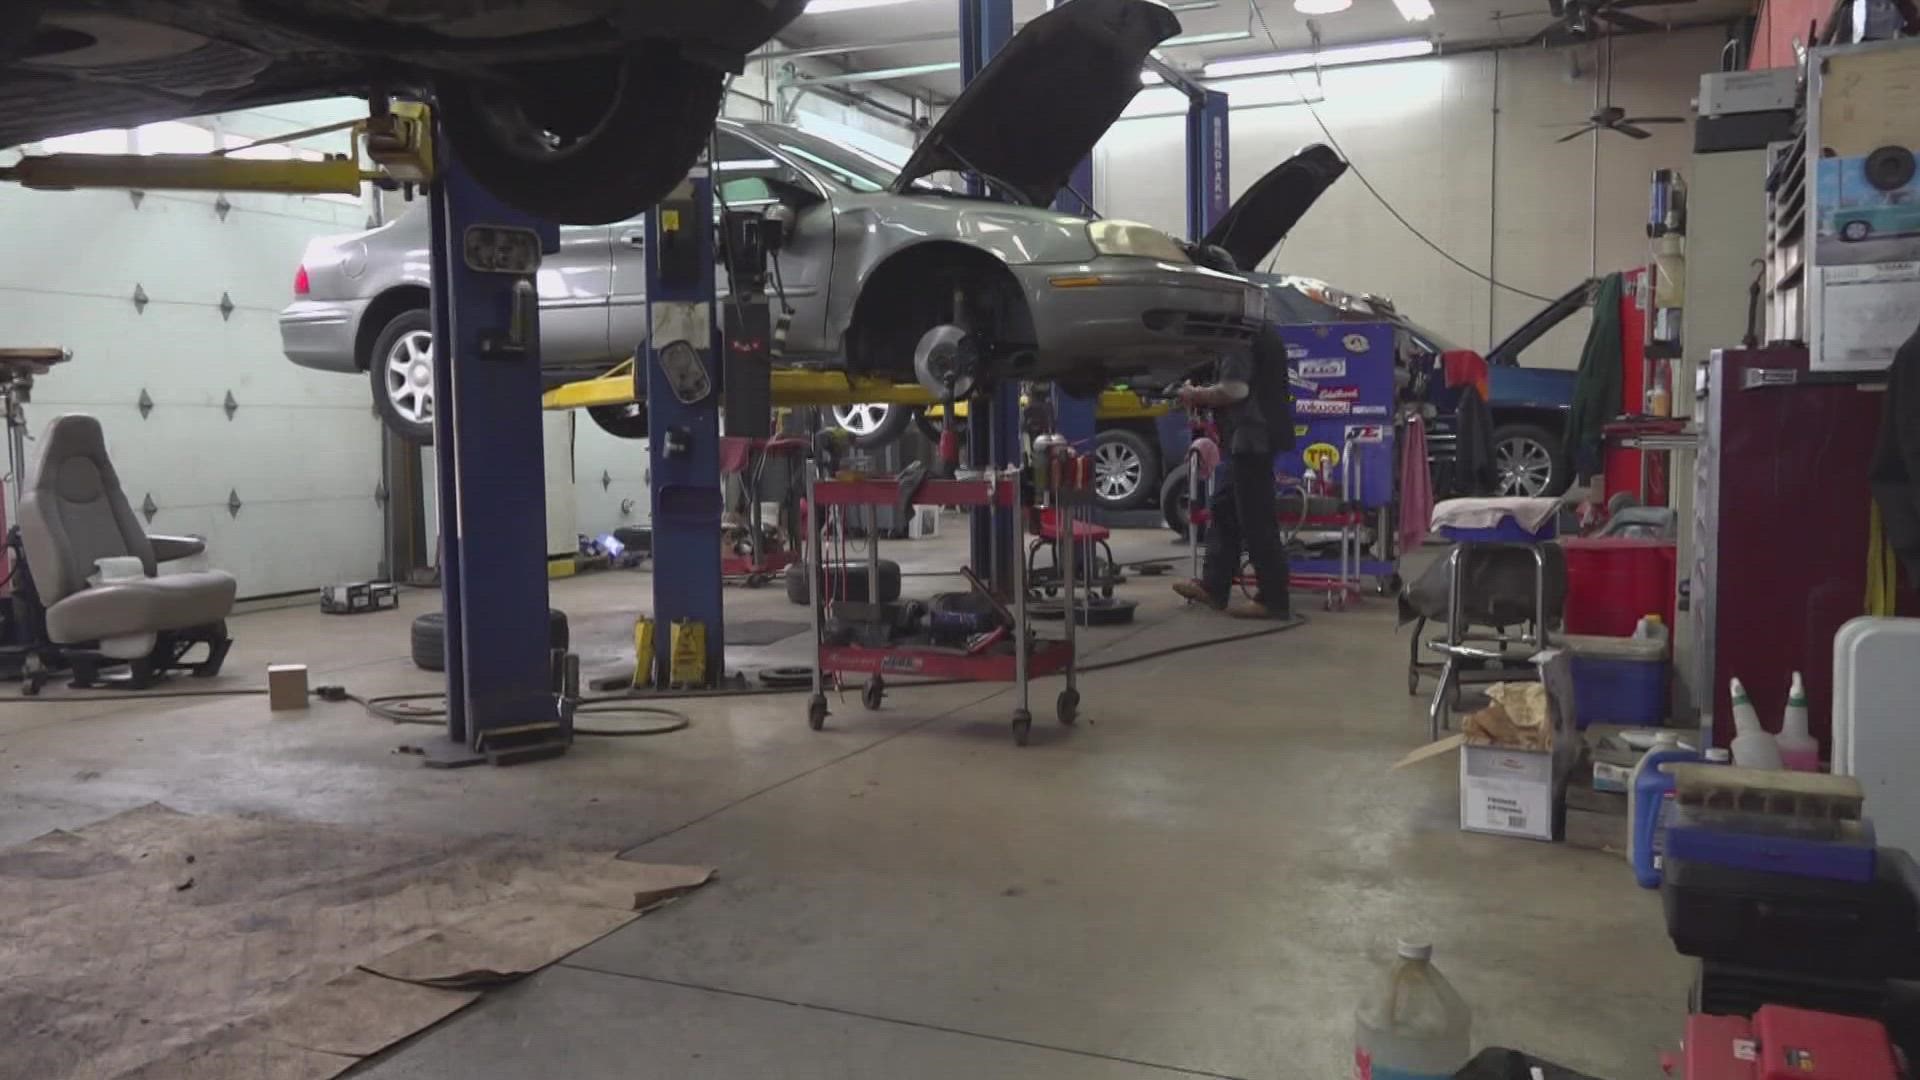 According to Market Source, the U.S. is facing a “critical, ongoing shortage of auto technicians.”